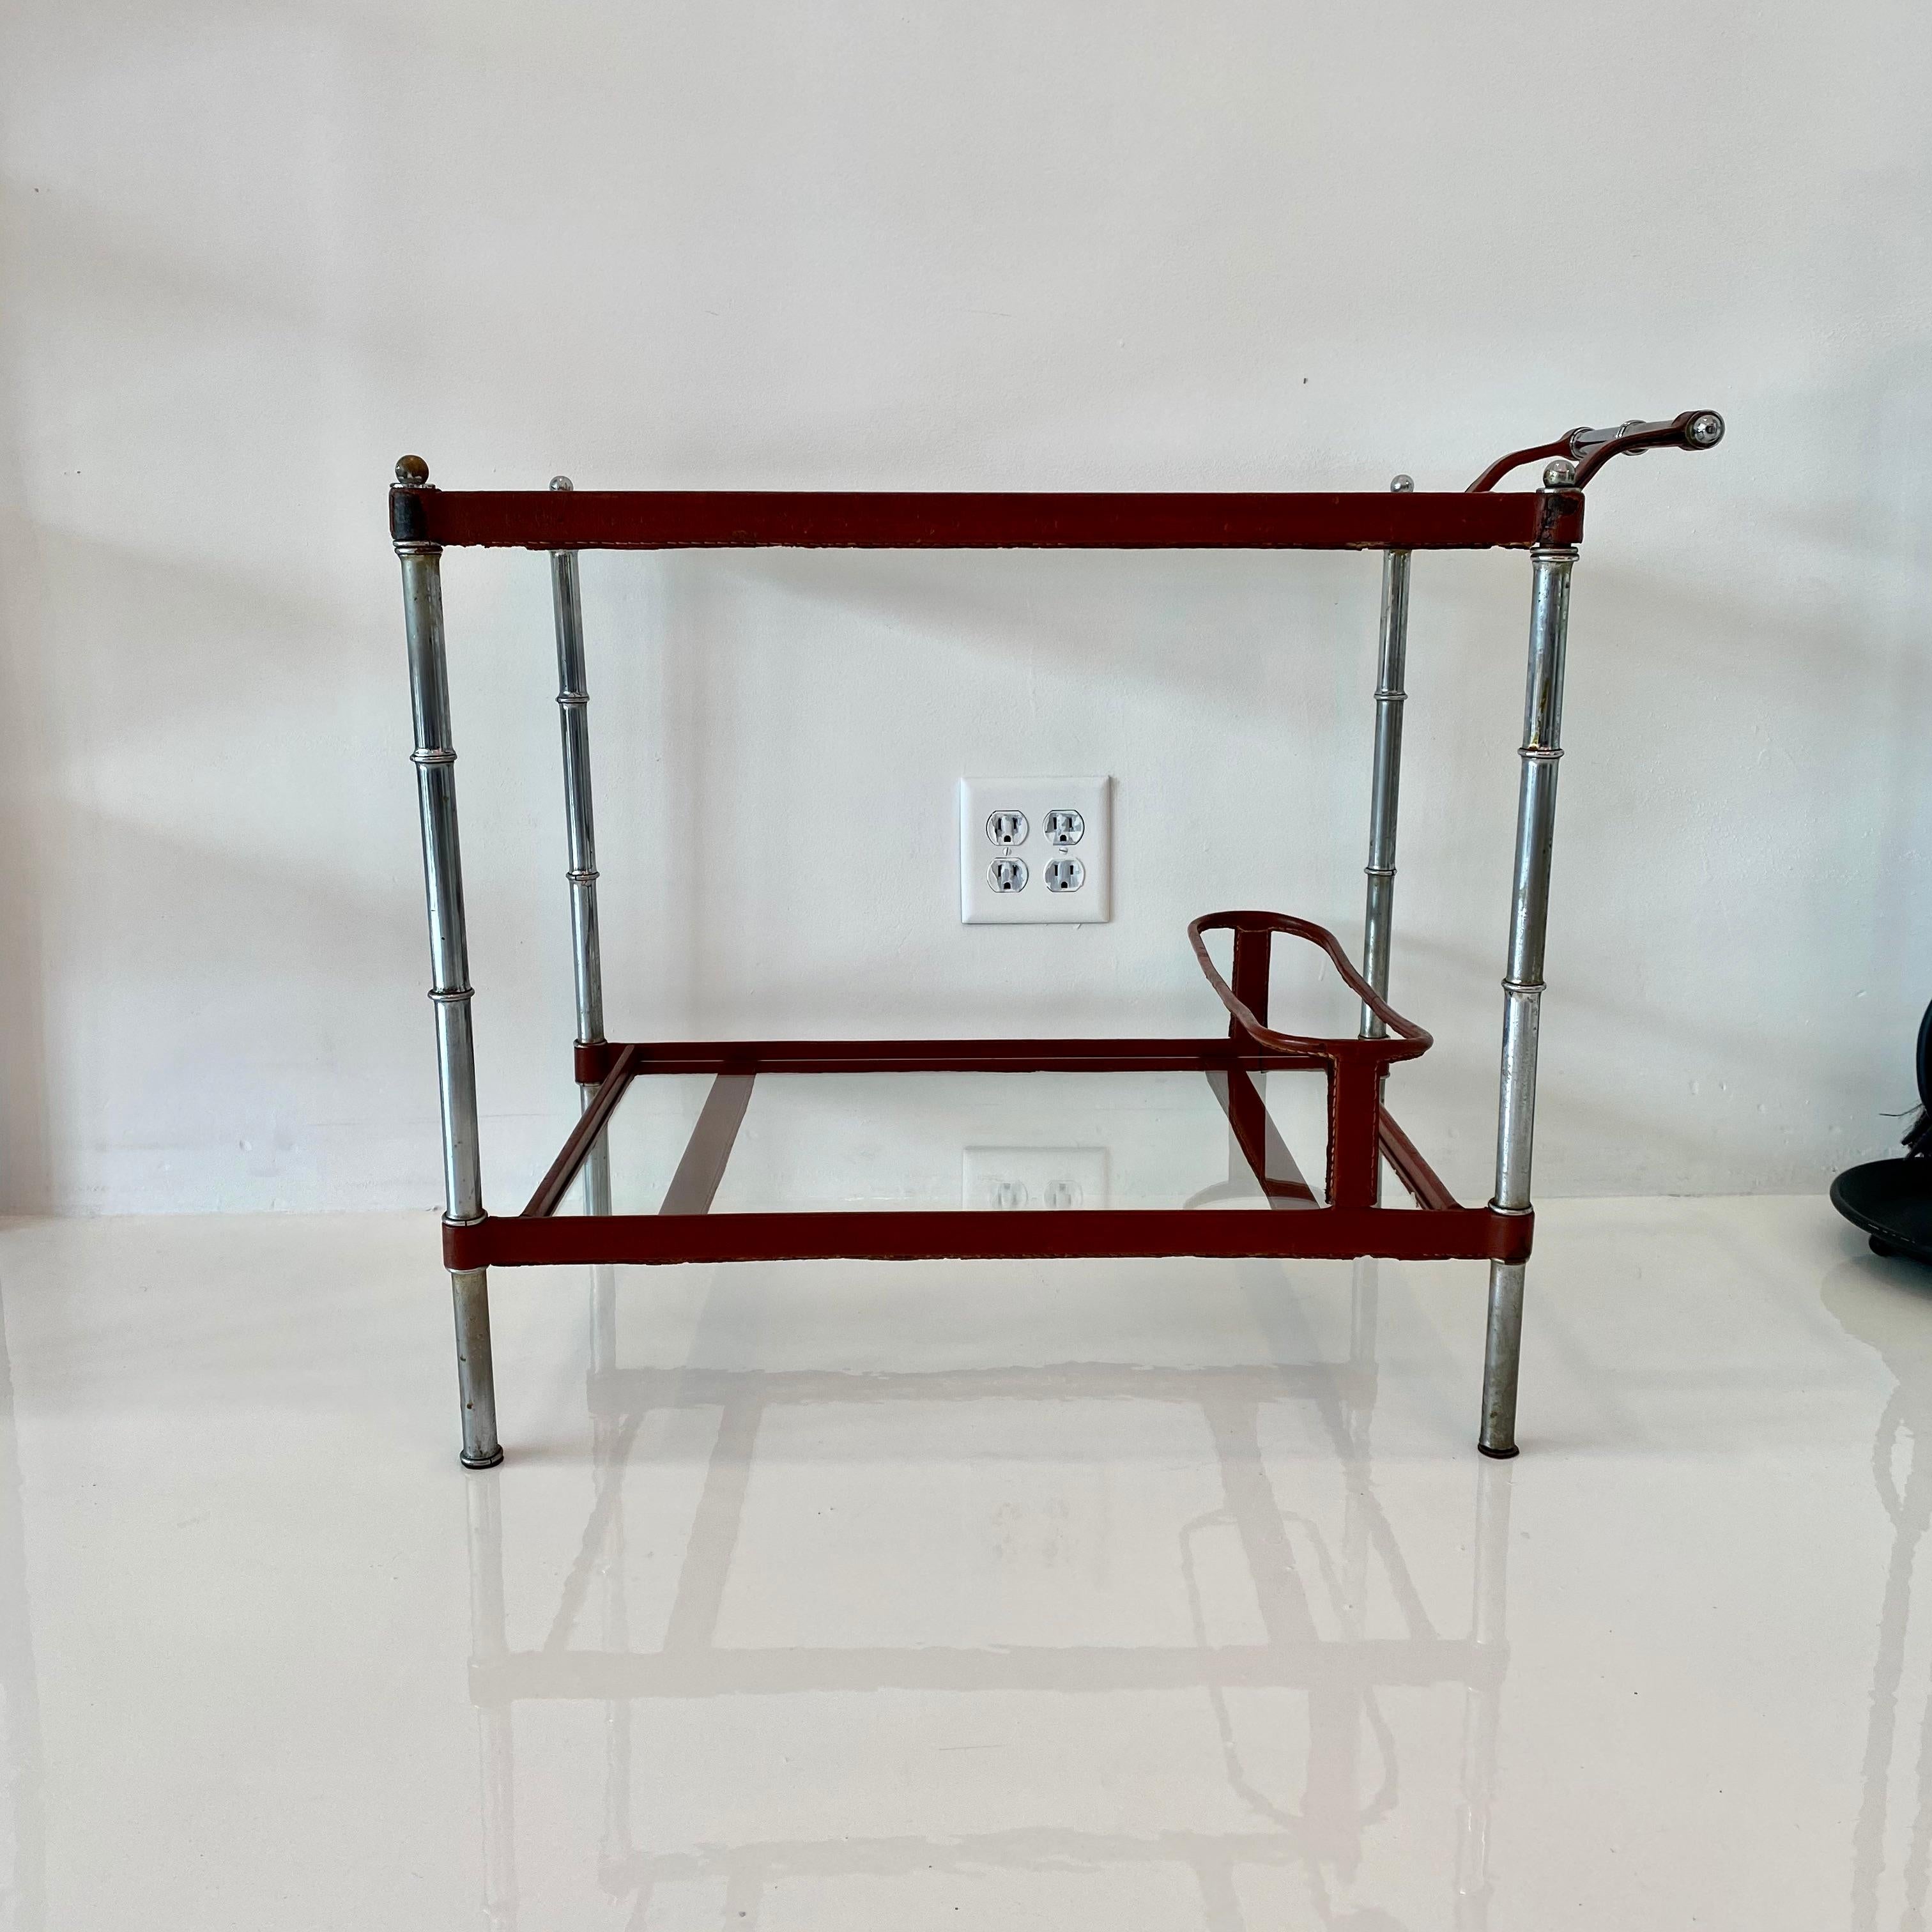 Handsome bar cart by French designer Jacques Adnet. Leather wrapped frame with two glass shelves. Offered with or without casters. Leather wrapped bottle holder on bottom shelf. Deep burgundy leather with Classic Adnet contrast stitching throughout.